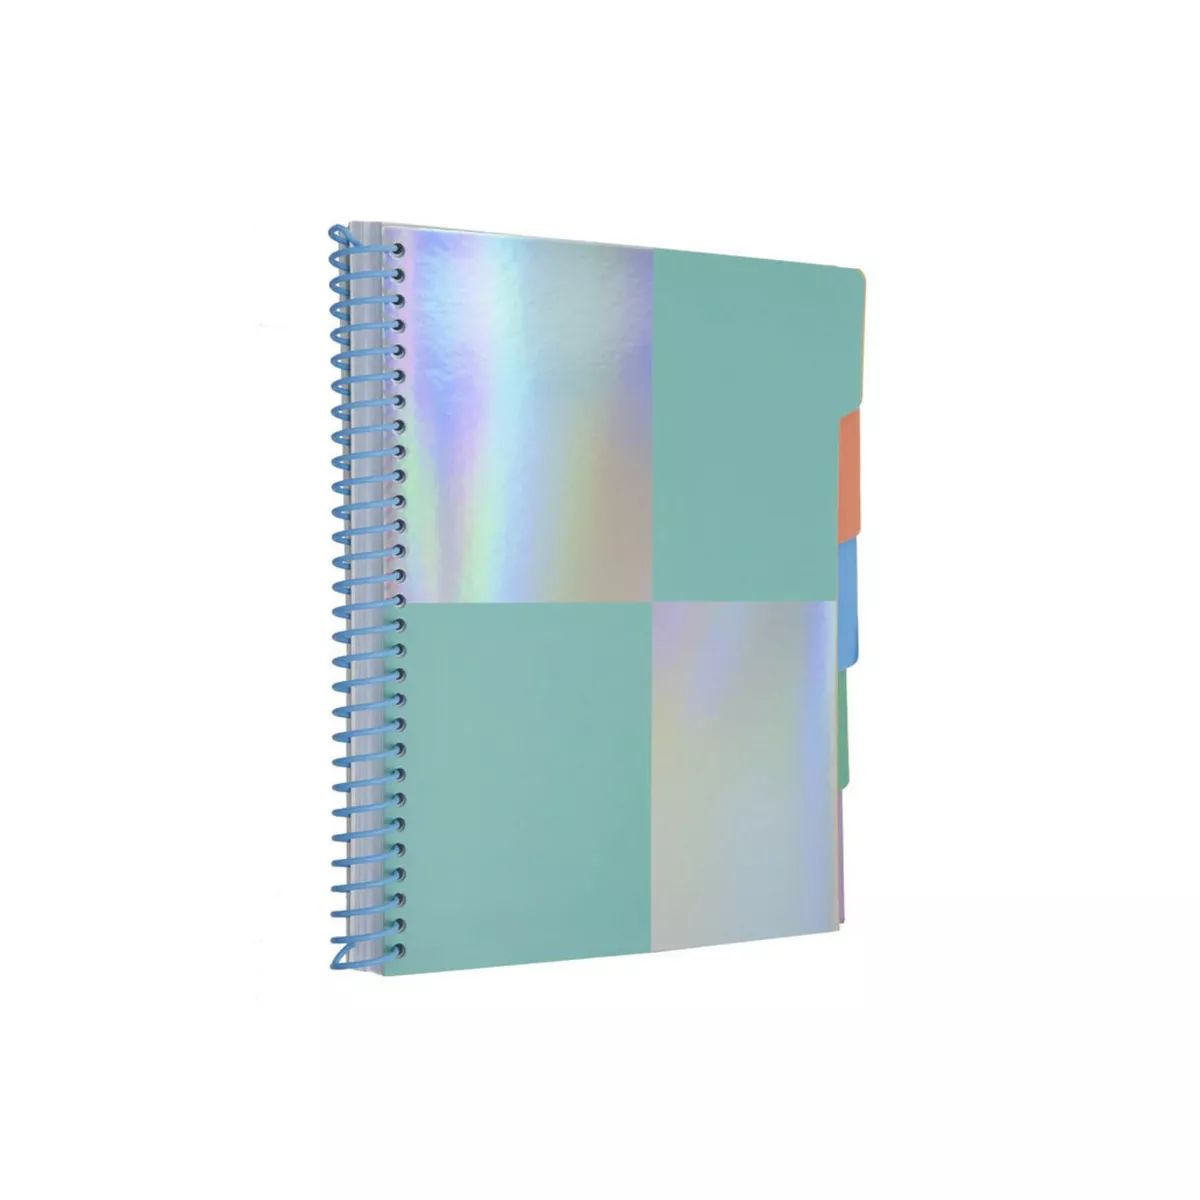 Post-it 200 Page Dot Grid Tabbed Notebook 8"x10" Teal/Iridescent | Target